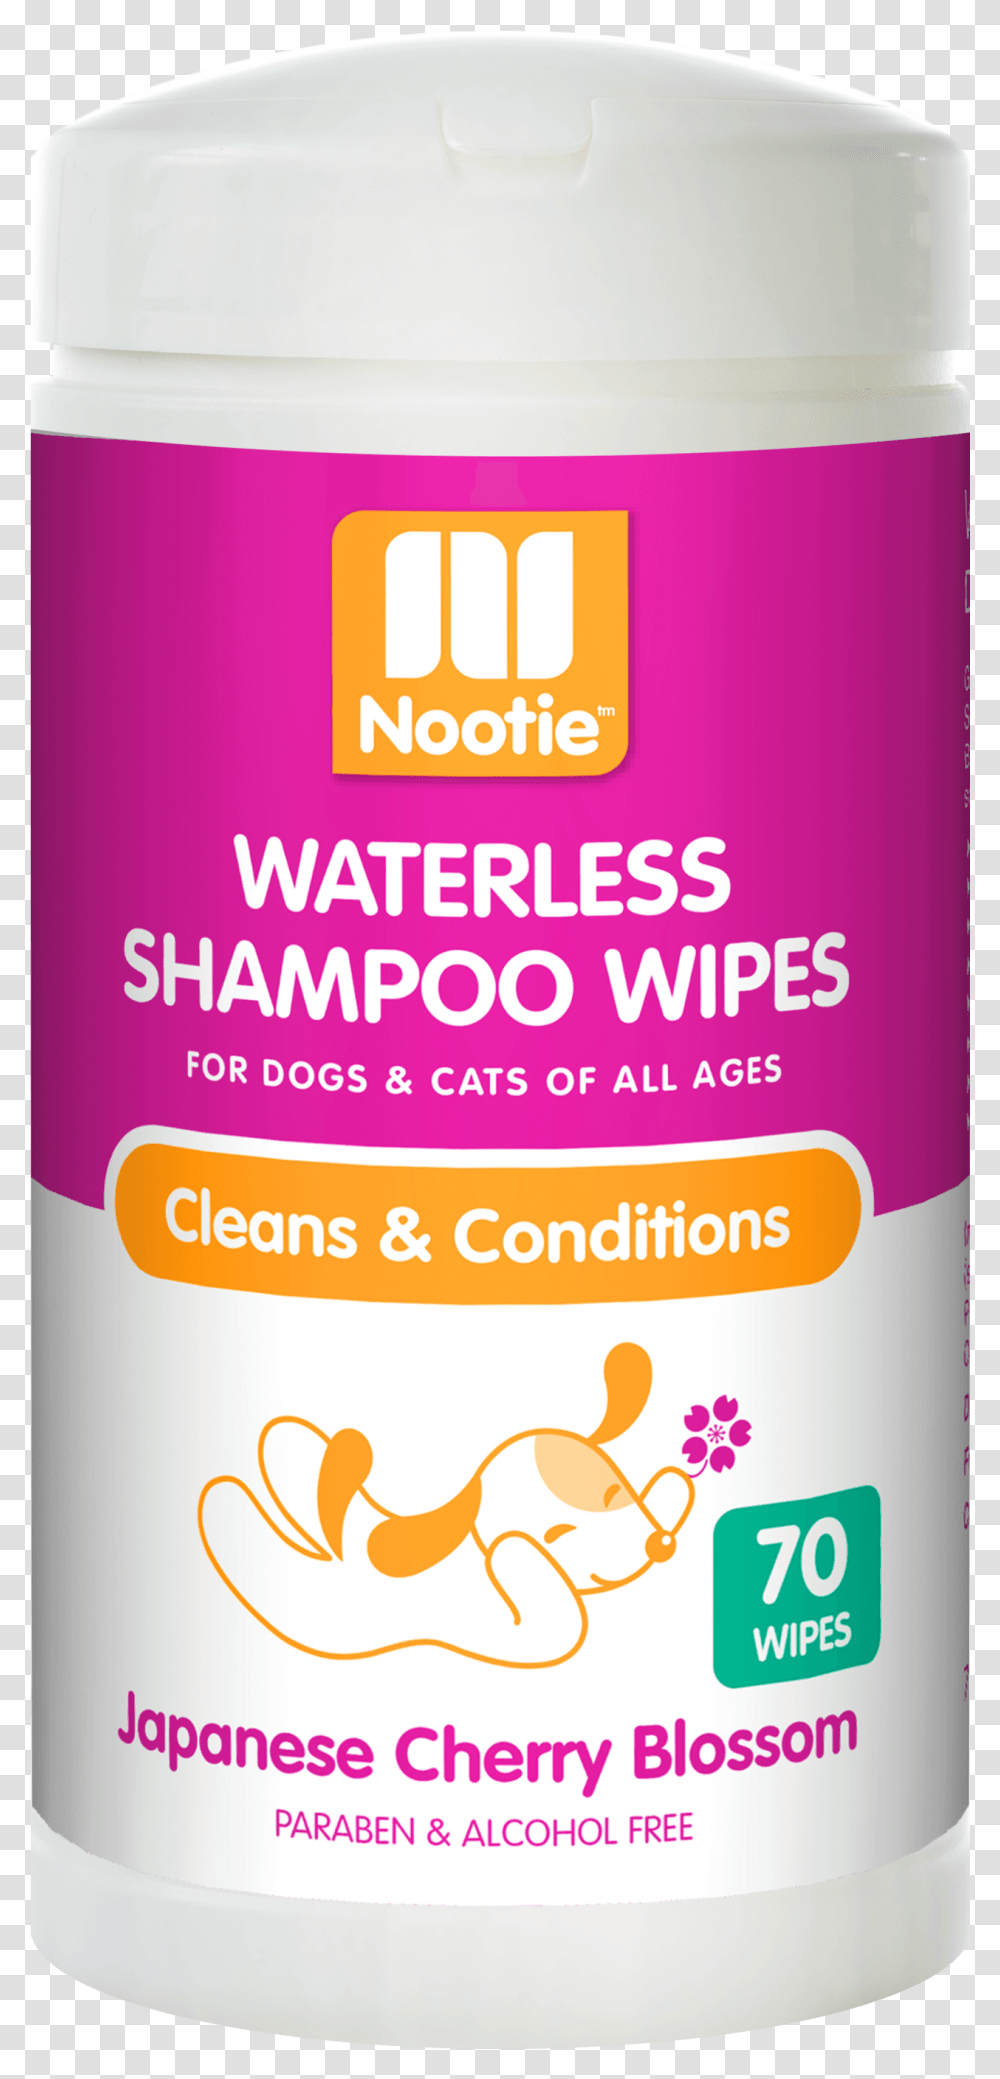 Nootie Waterless Shampoo Wipes, Bottle, Label, Cosmetics Transparent Png